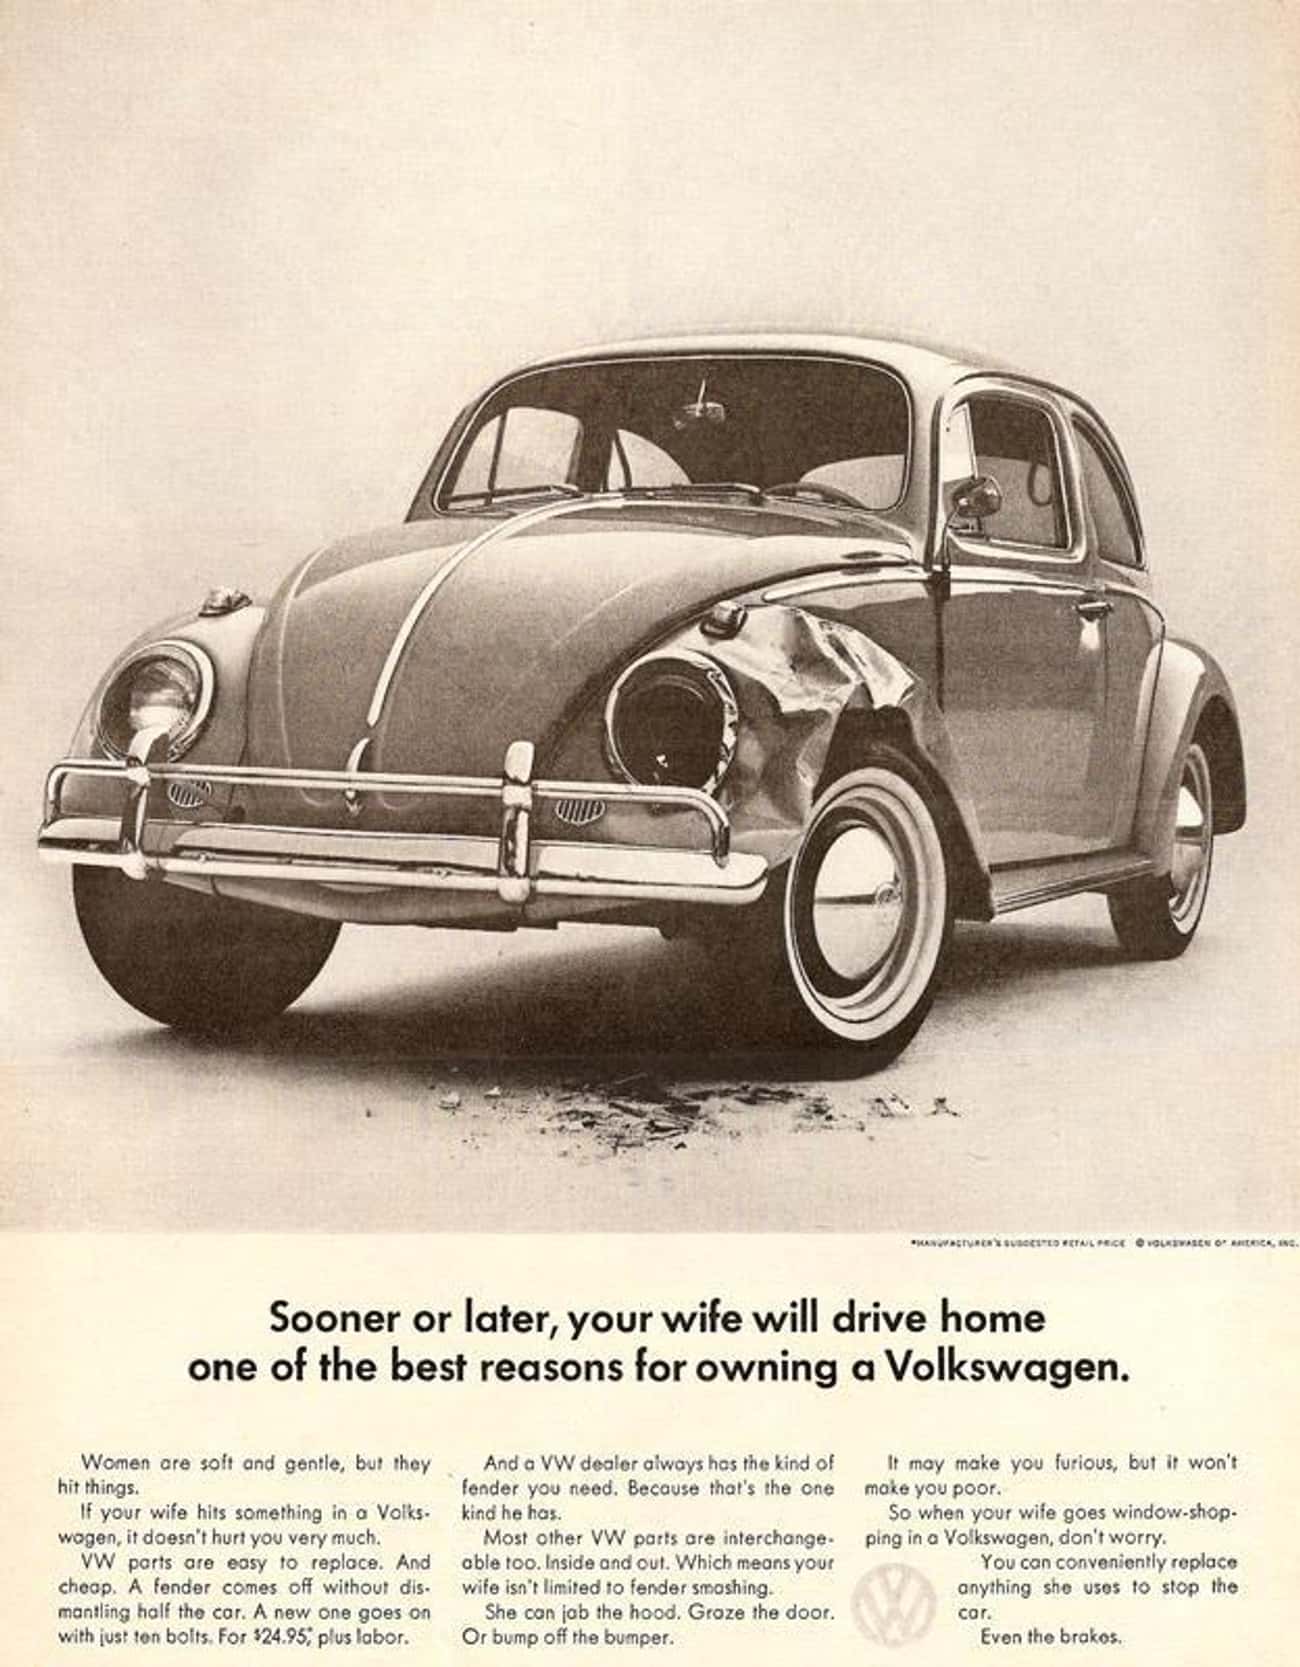 'Sooner Or Later, Your Wife Will Drive Home One Of The Best Reasons For Owning A Volkswagen'